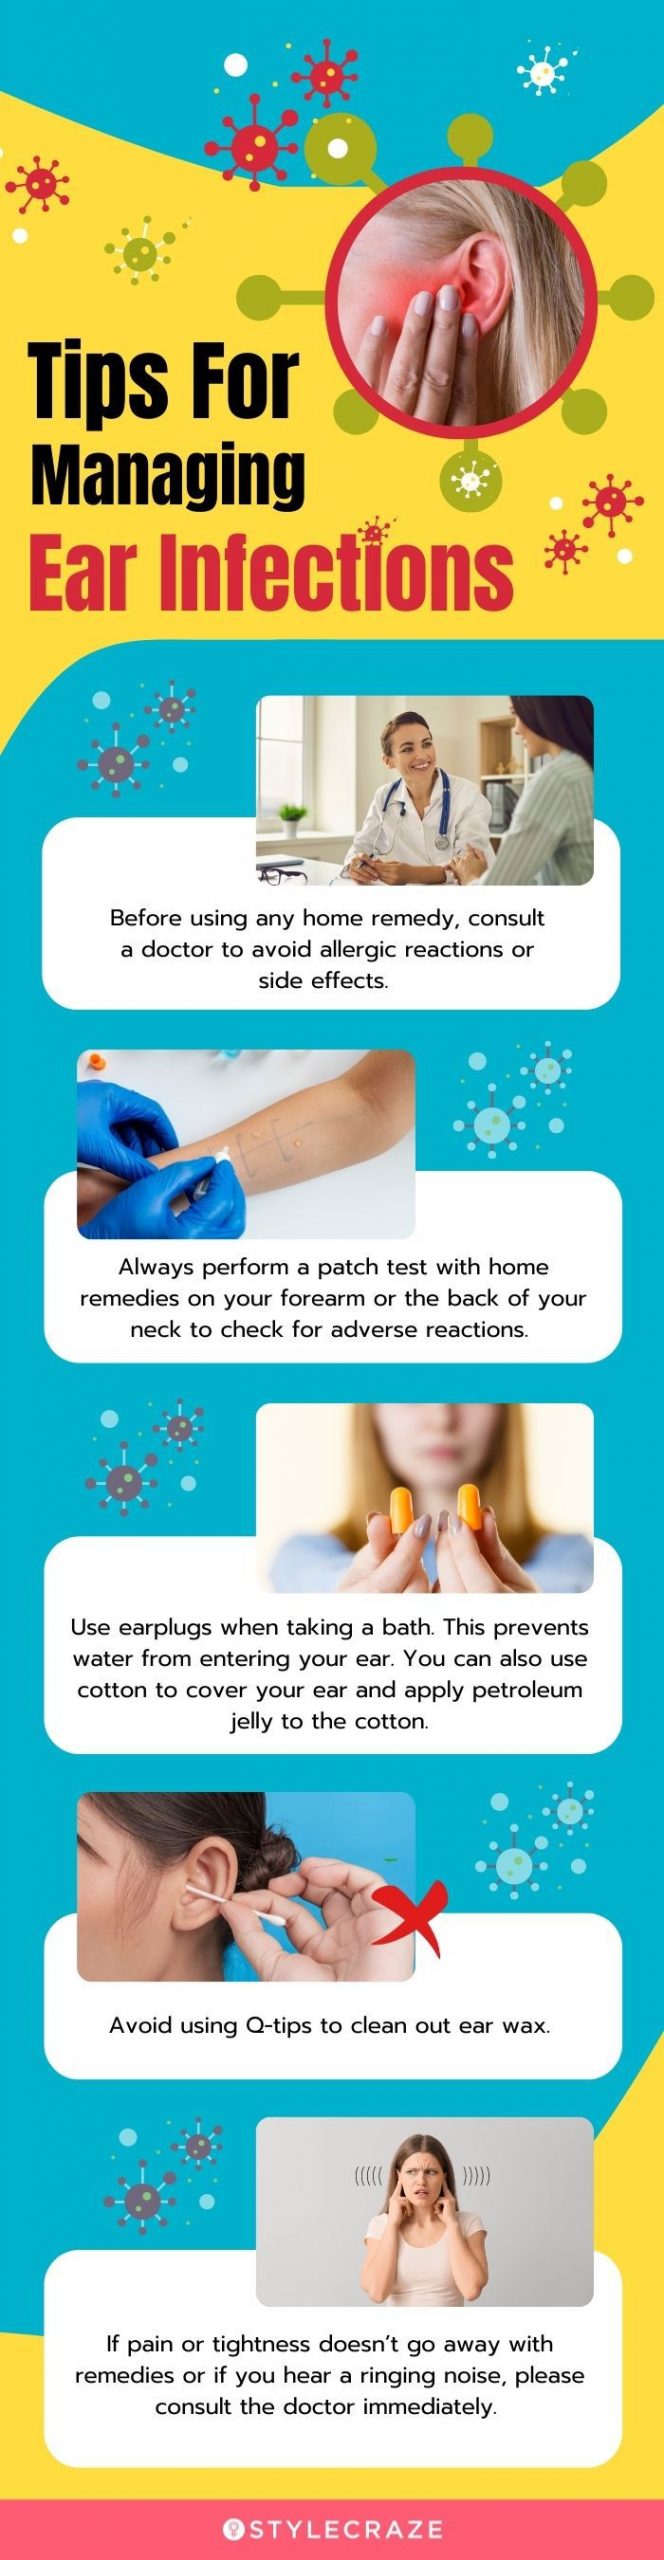 tips for managing ear infections [infographic]